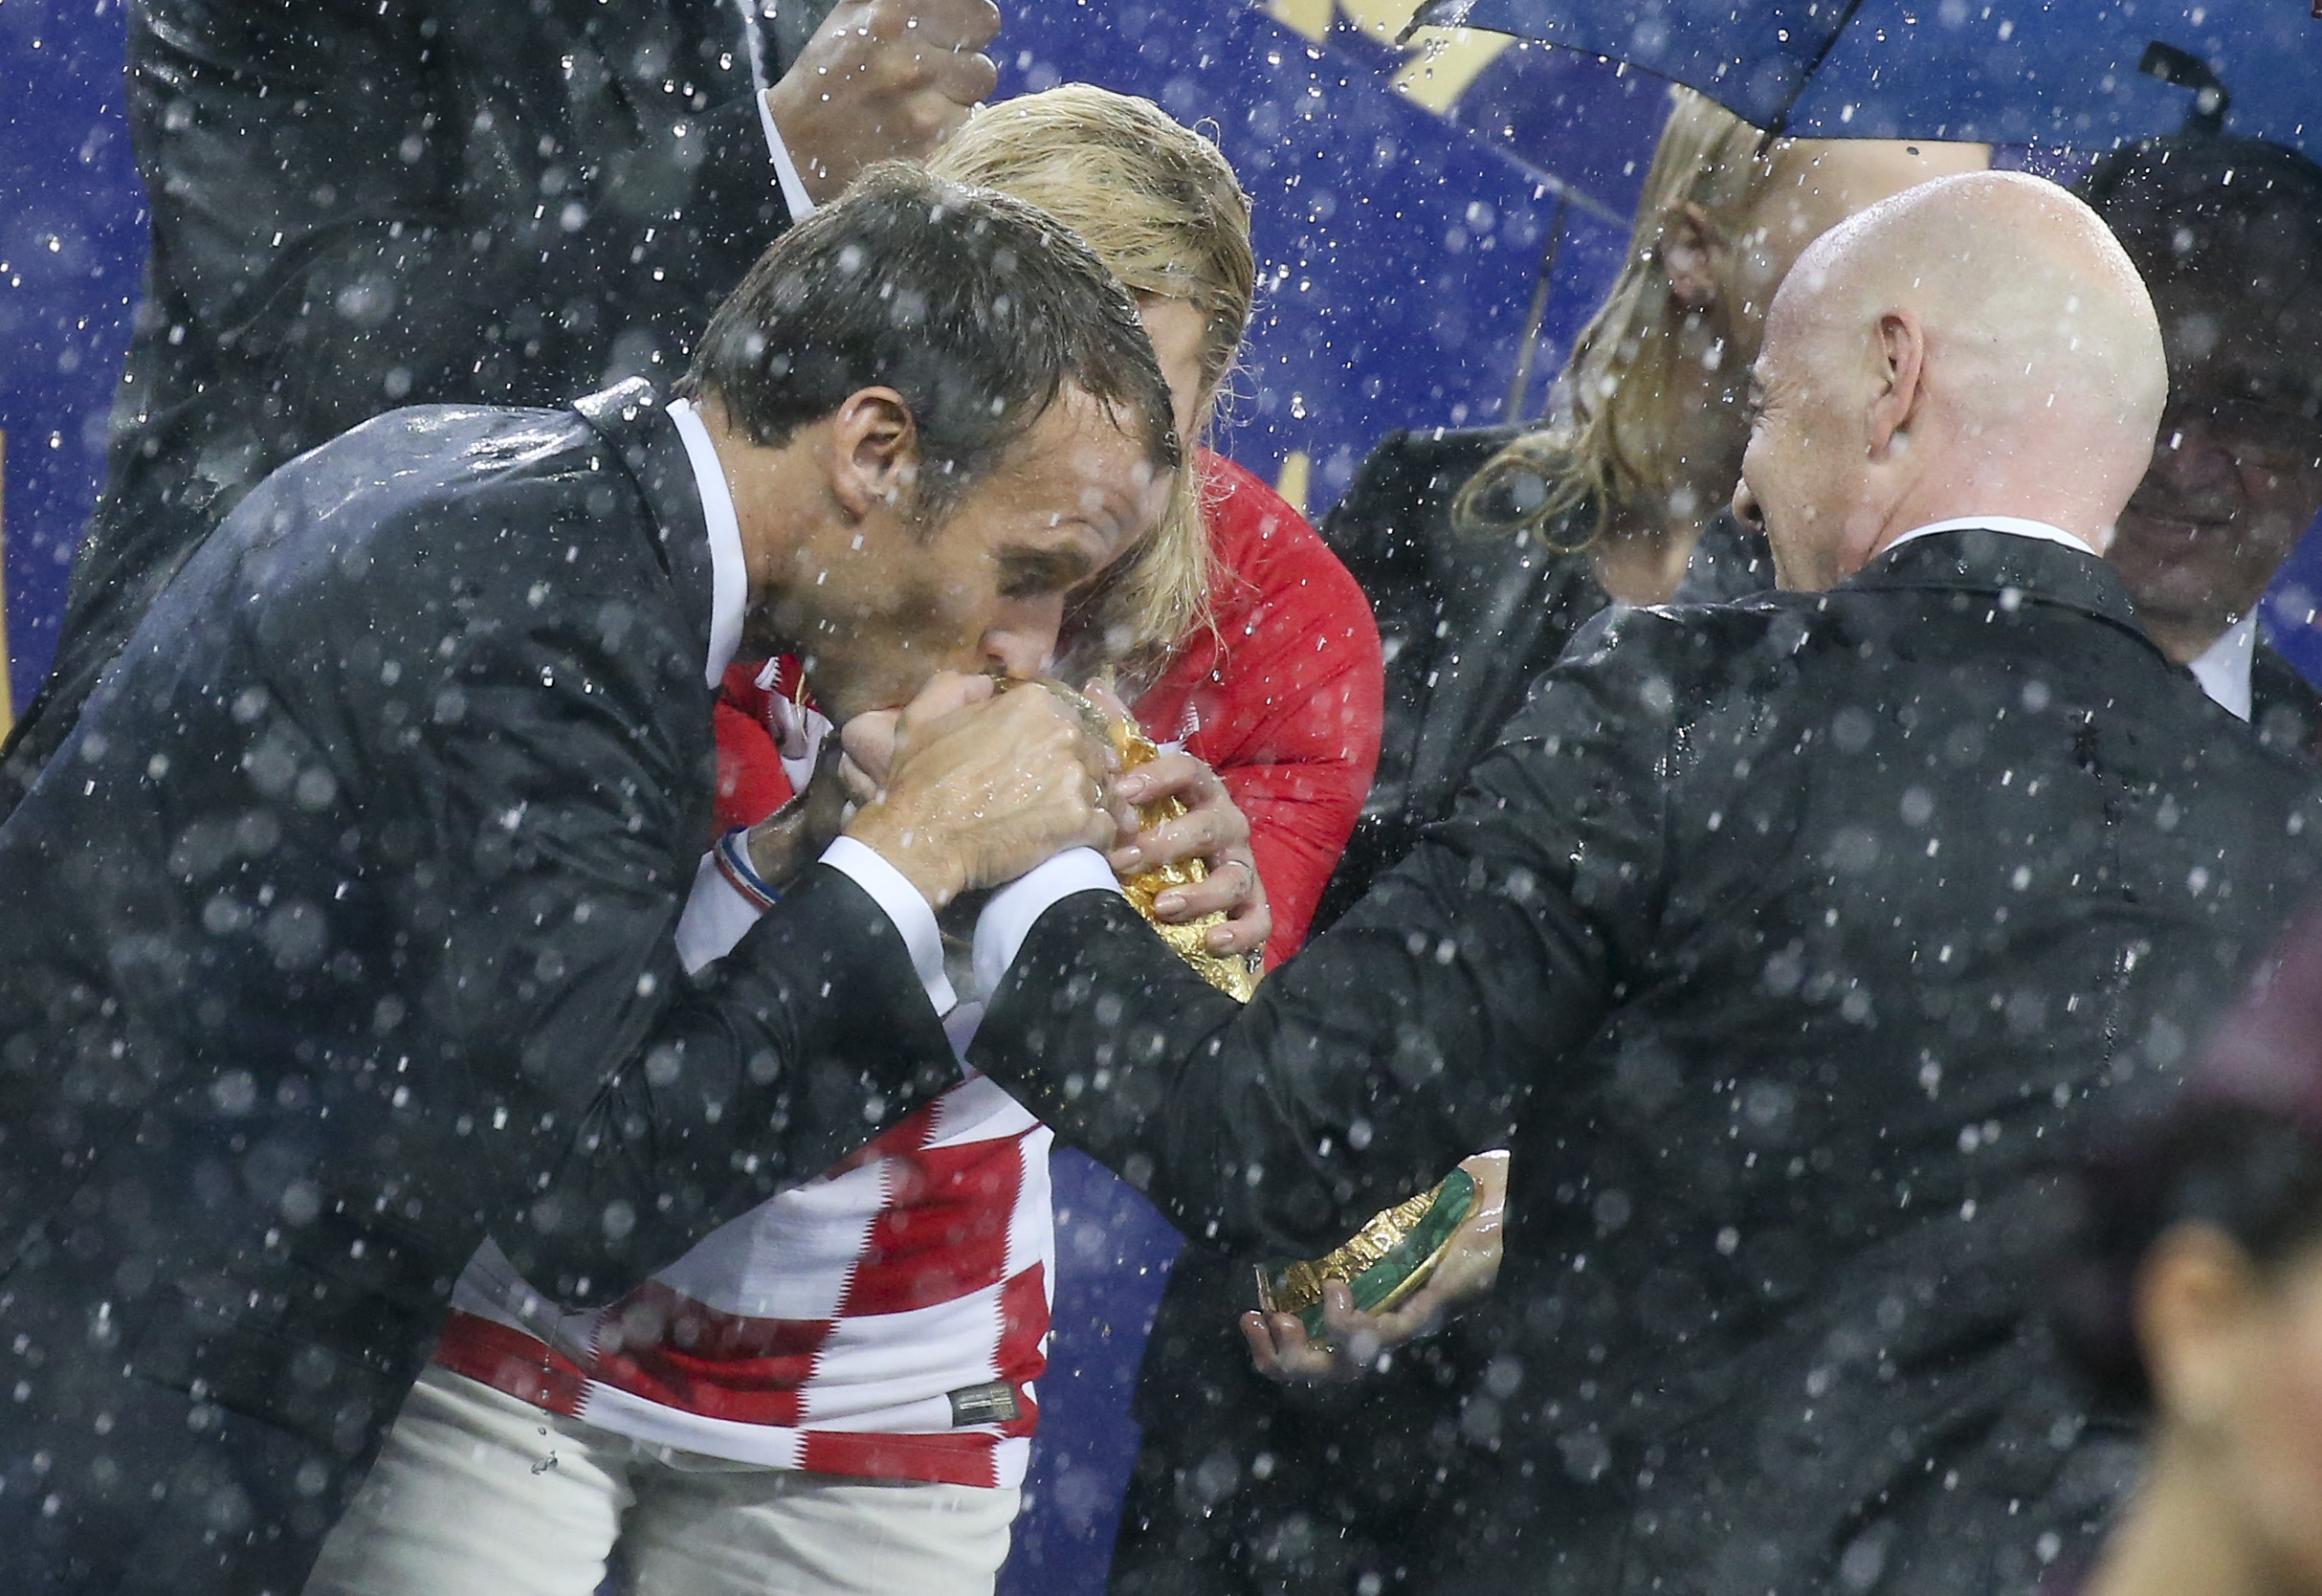 President of France Emmanuel Macron and President of Croatia Kolinda Grabar-Kitarovic want to kiss the World Cup held by FIFA President Gianni Infantino during the trophy ceremony following the 2018 FIFA World Cup Russia Final between France and Croatia at Luzhniki Stadium on July 15, 2018 in Moscow, Russia. (Photo by Jean Catuffe/Getty Images) (Jean Catuffe—Getty Images)